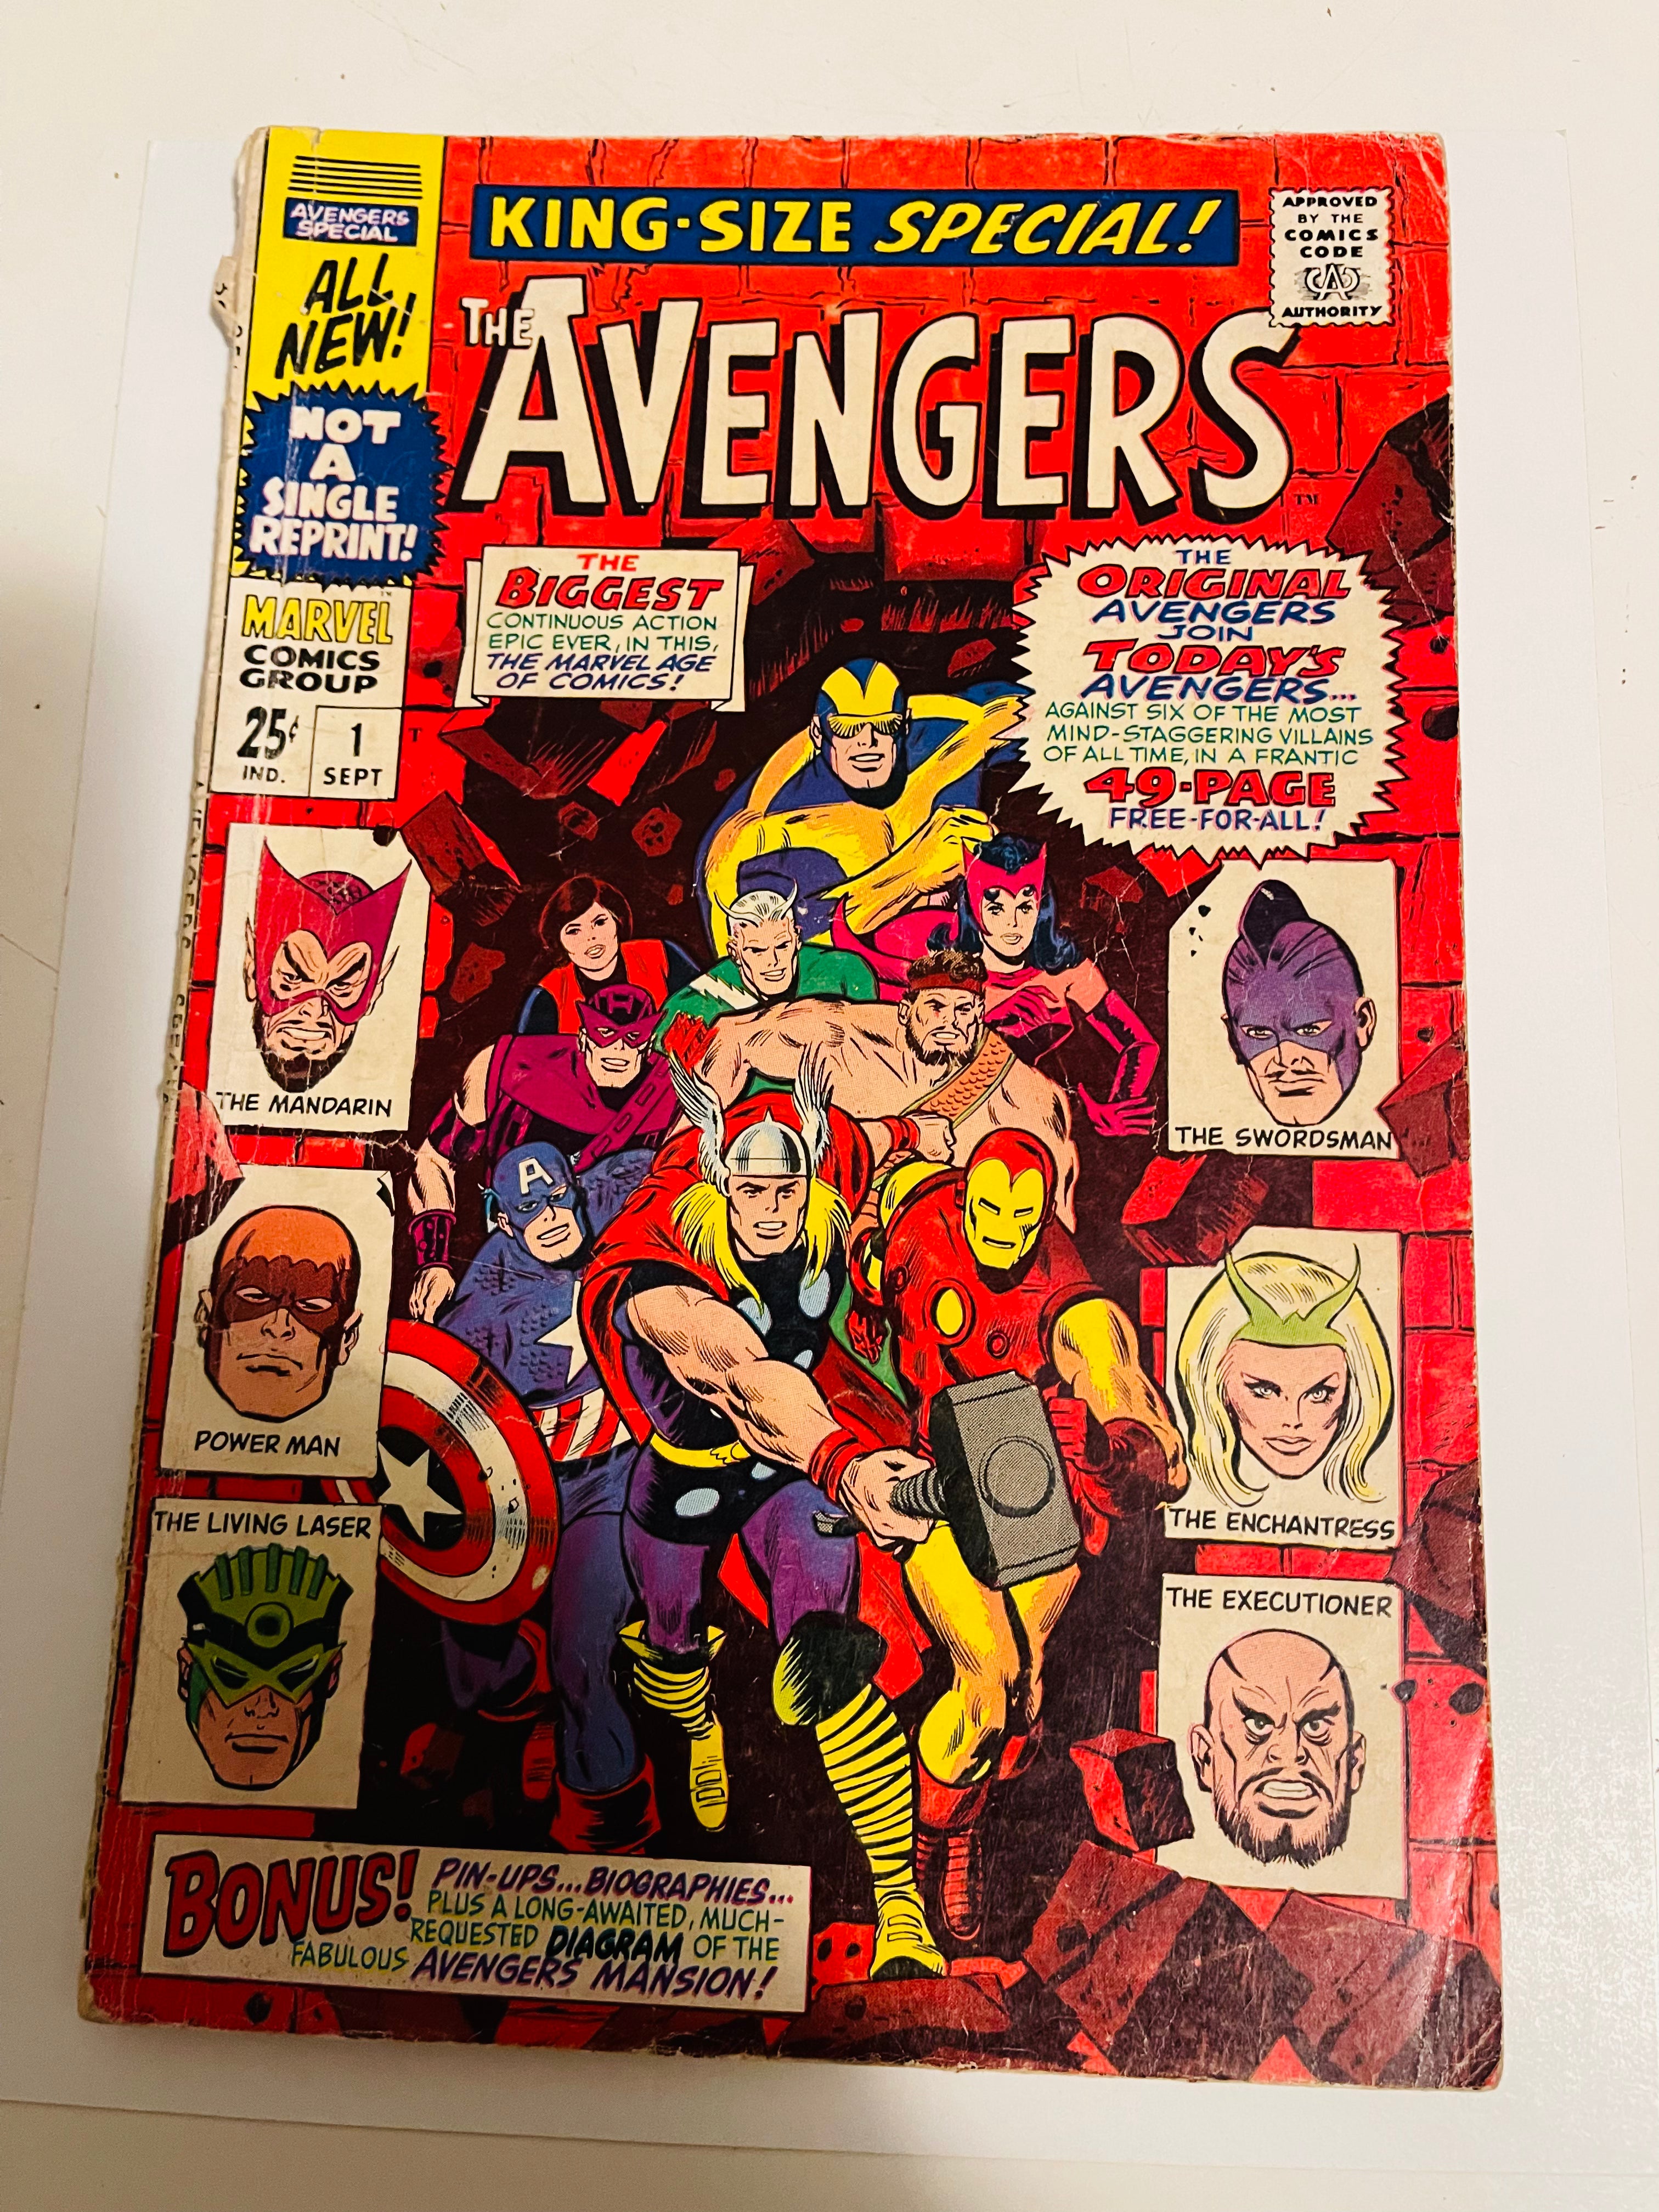 Avengers King size special comic #1 from 1967